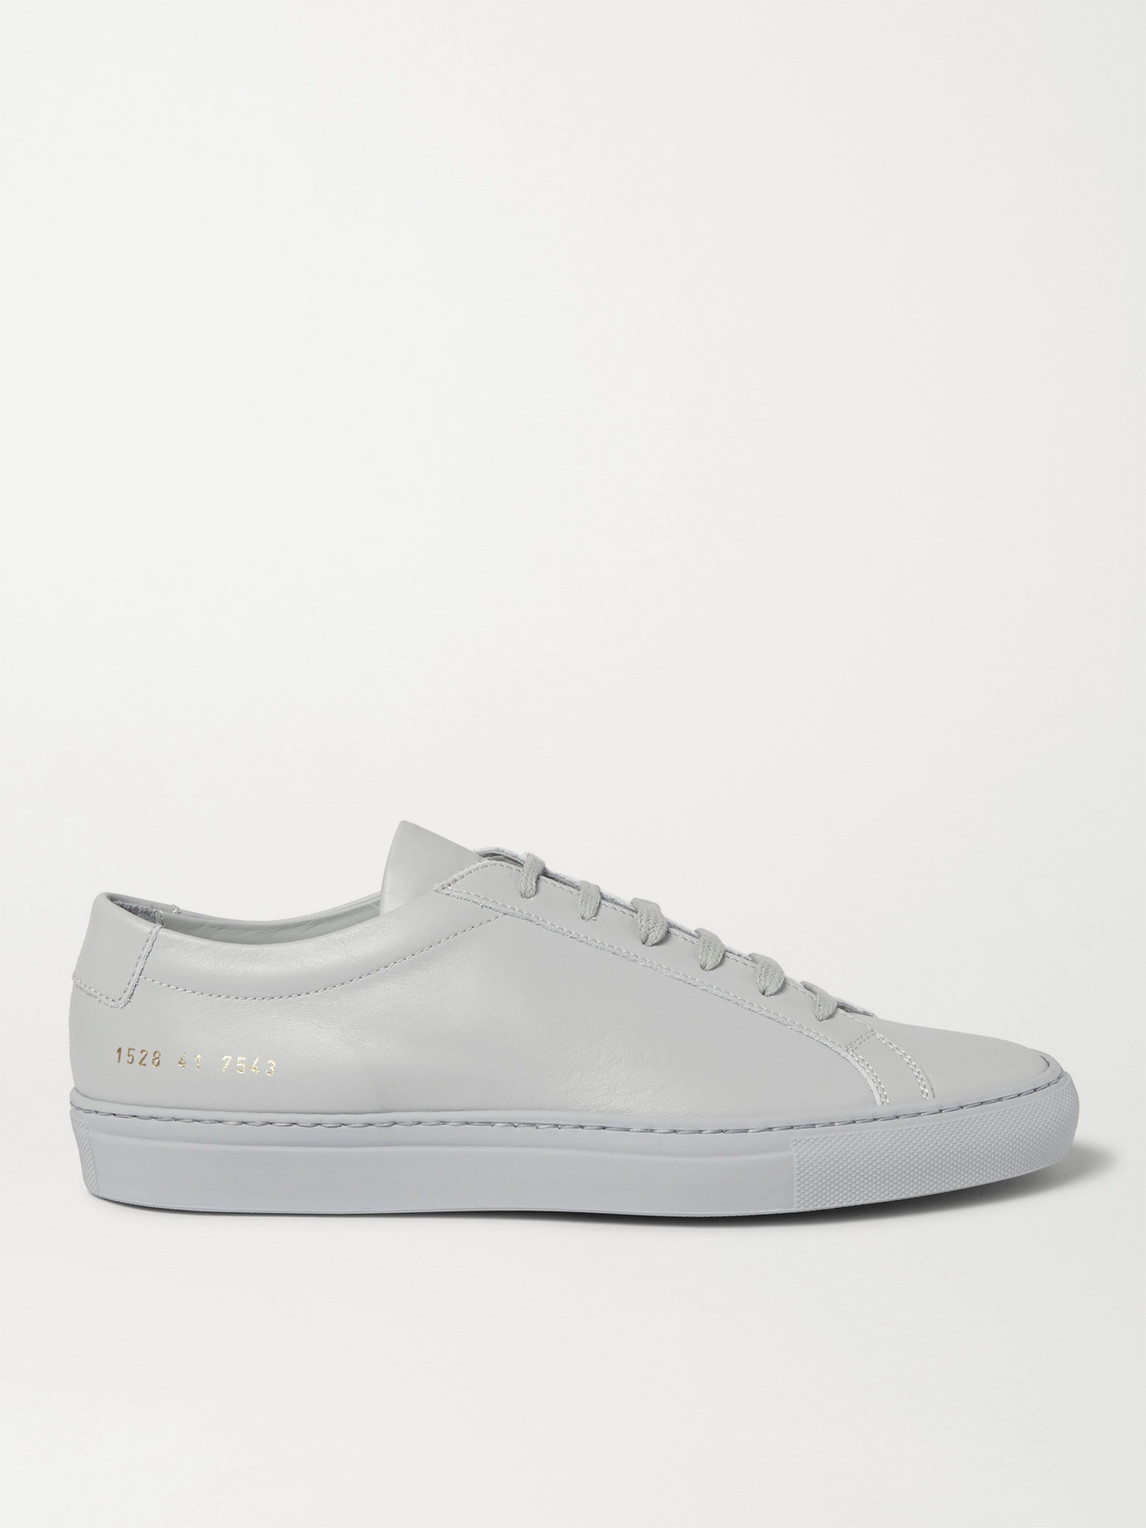 Common Projects Original Achilles Leather Sneakers In Gray